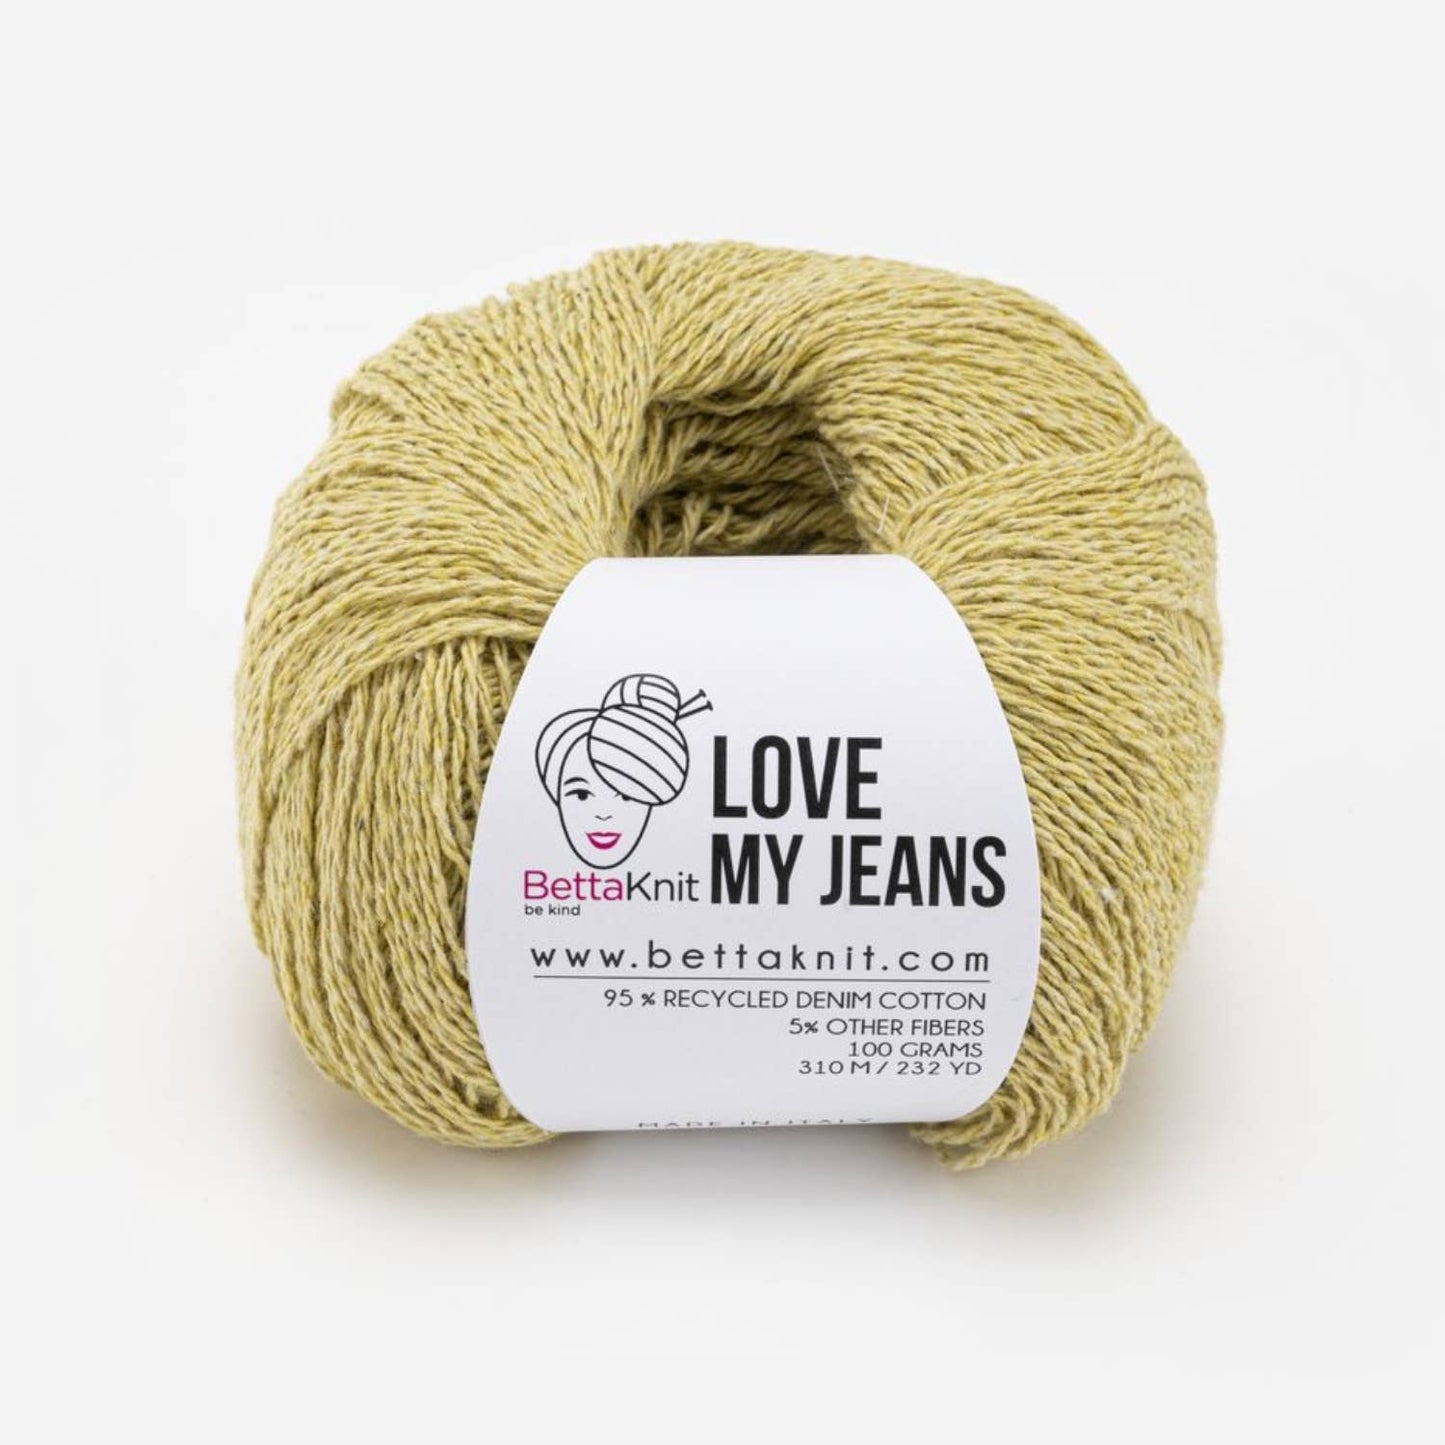 Love My Jeans, yarn obtained from the recycling of old jeans